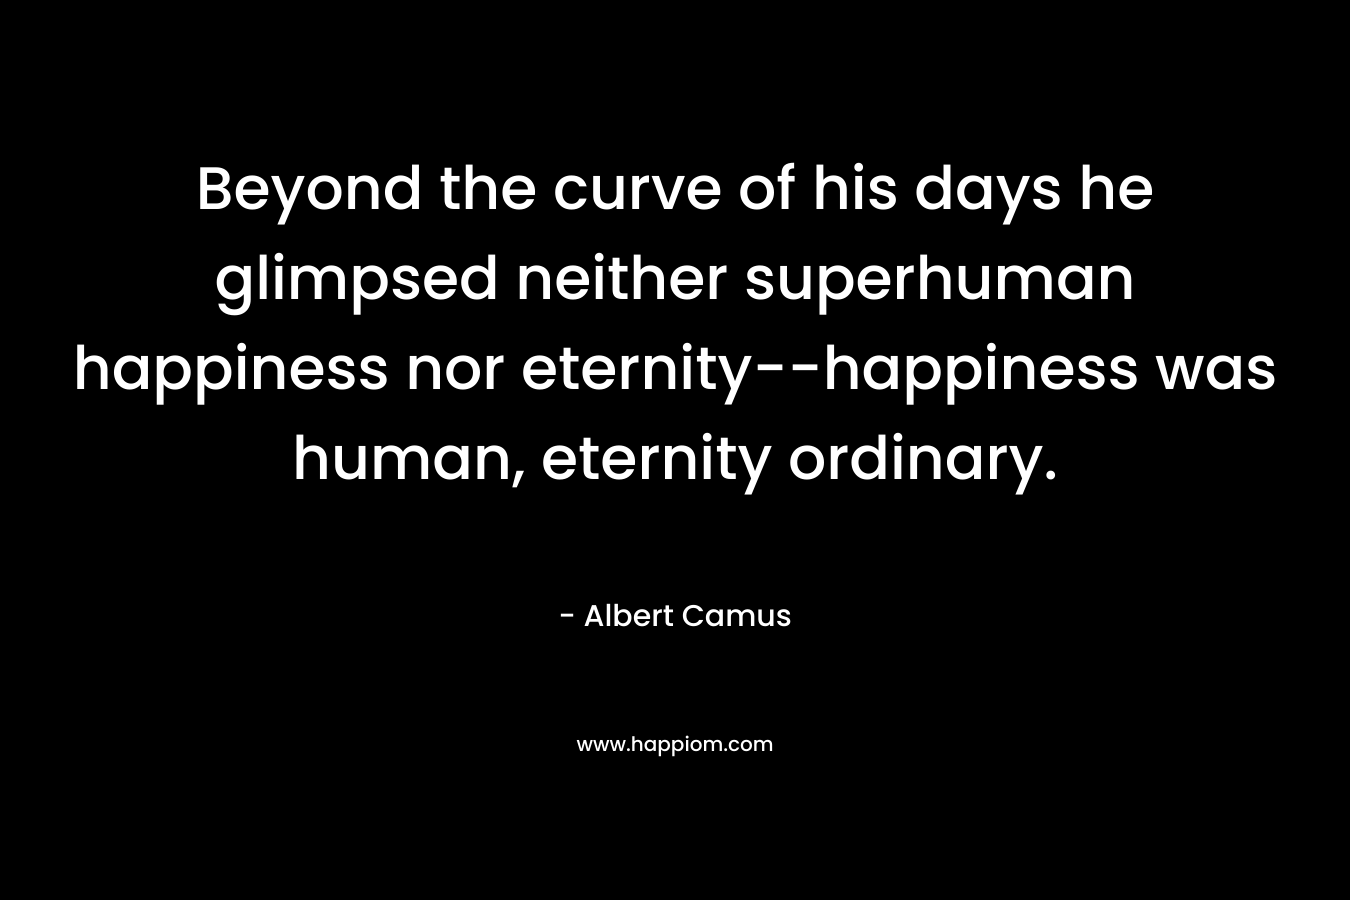 Beyond the curve of his days he glimpsed neither superhuman happiness nor eternity--happiness was human, eternity ordinary.